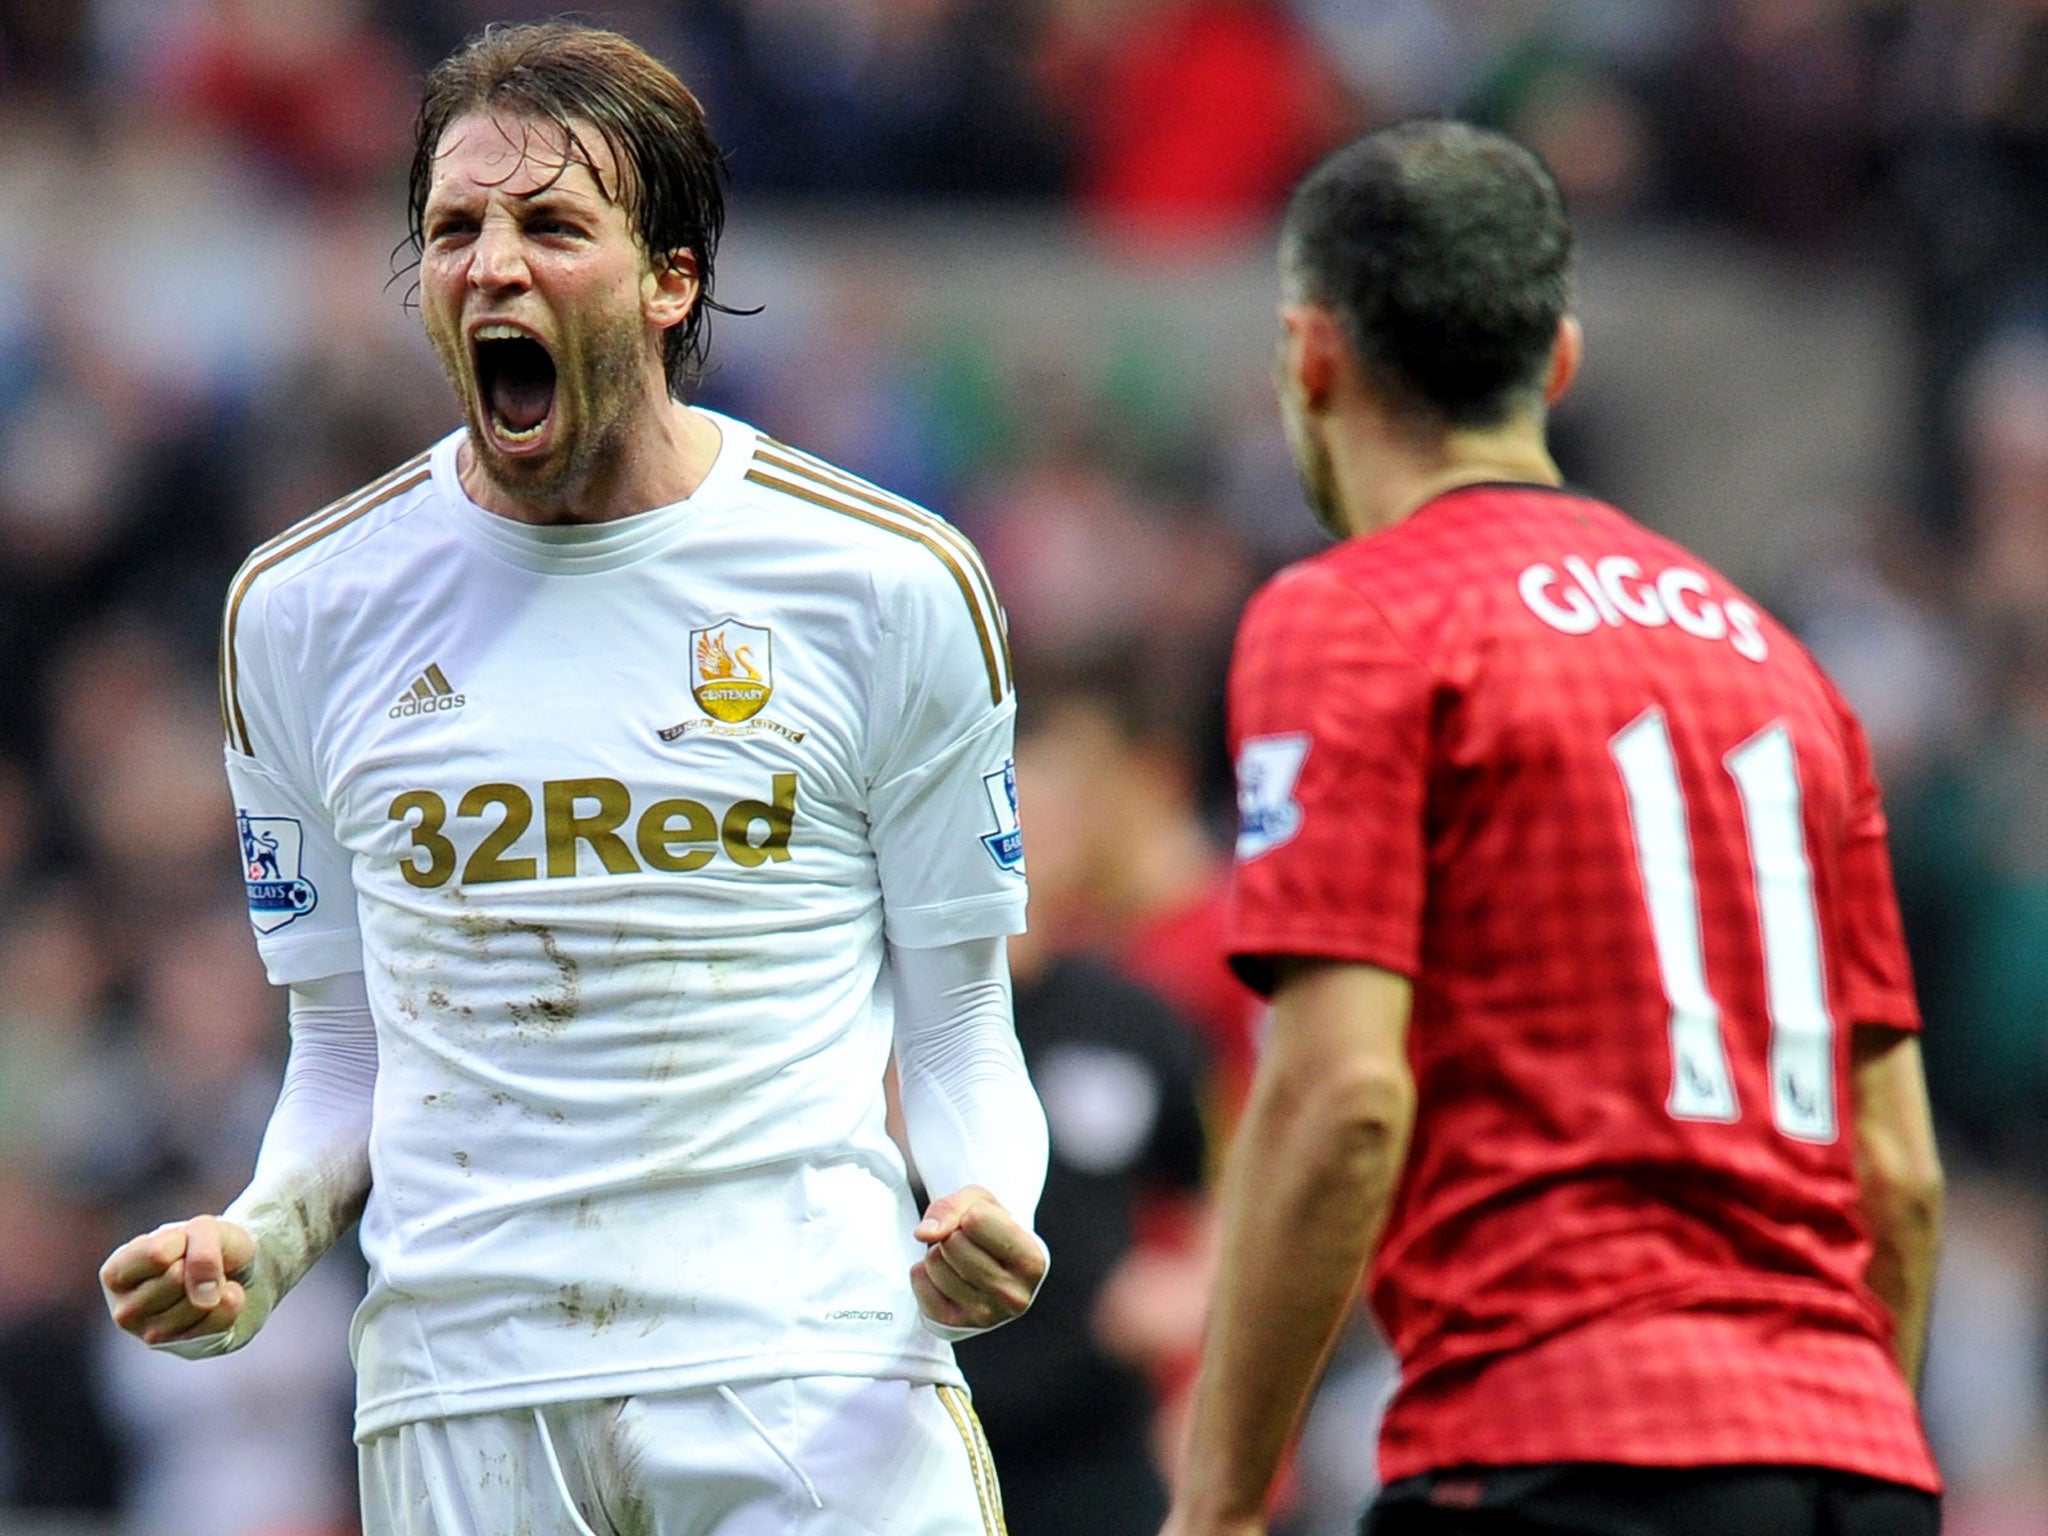 Swansea's Spanish player Michu (L) reacts after the final whistle during the English Premier League football match between Swansea City and Manchester United